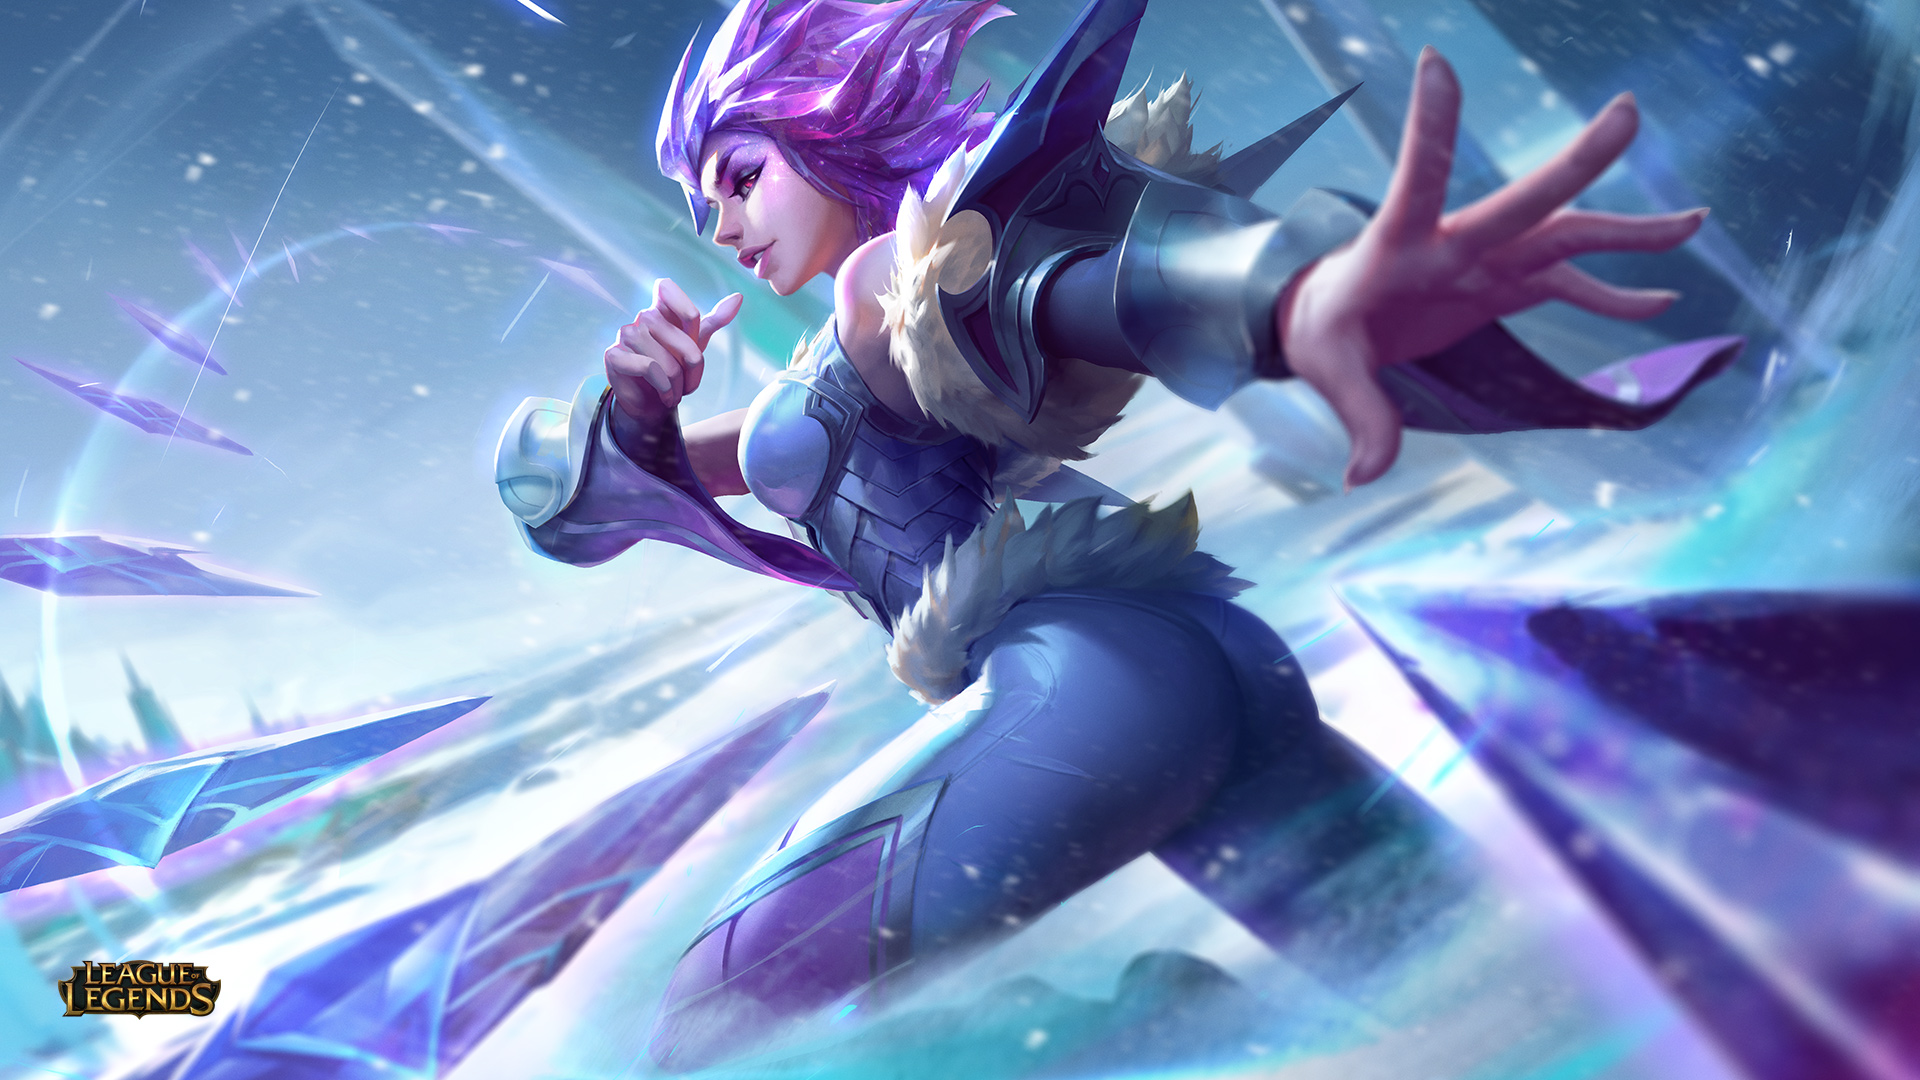 General 1920x1080 League of Legends PC gaming video games purple hair fantasy girl